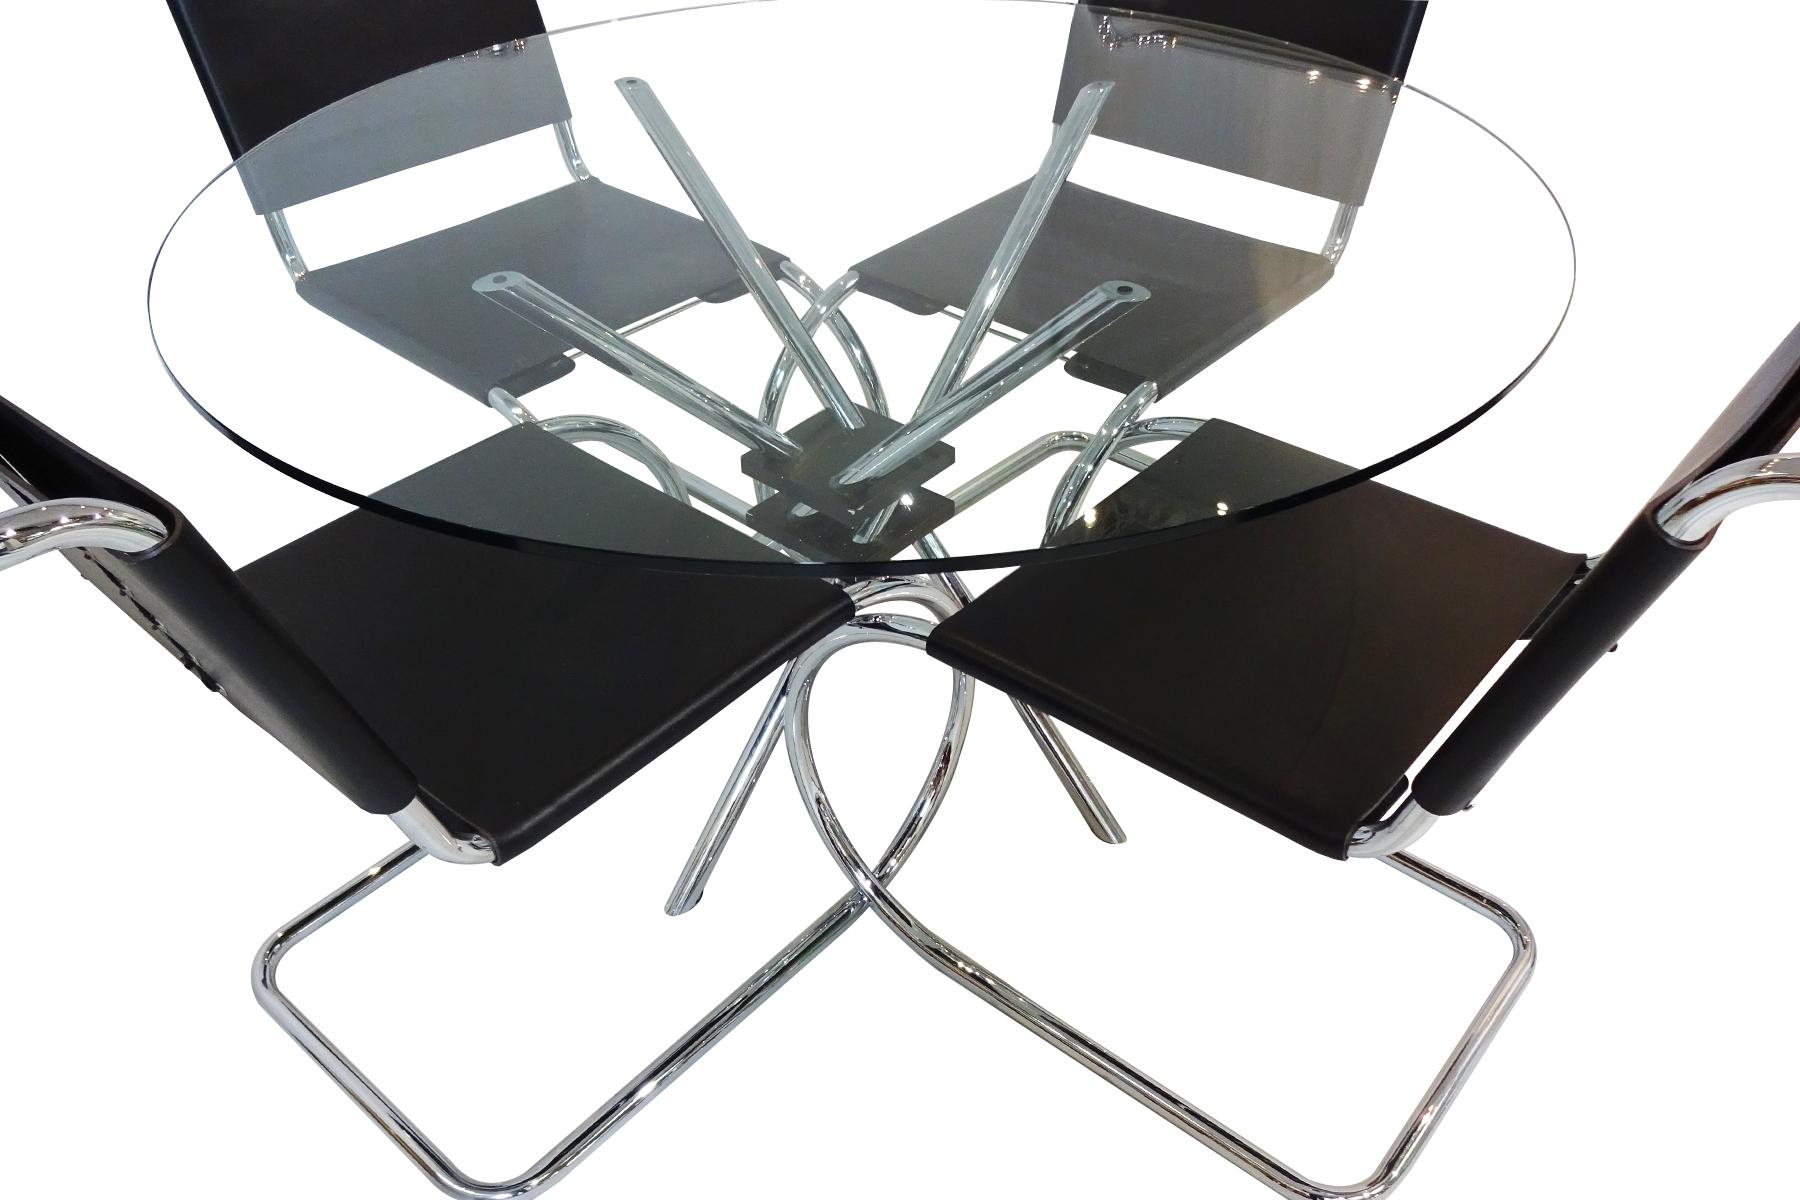 A set of Mies van der Rohe black leather and chrome chairs produced by Knoll International matched to a Takehiko Mizutani MZ59 table

These chairs are a design icon being one of the very first cantilever design chairs ever designed by van der